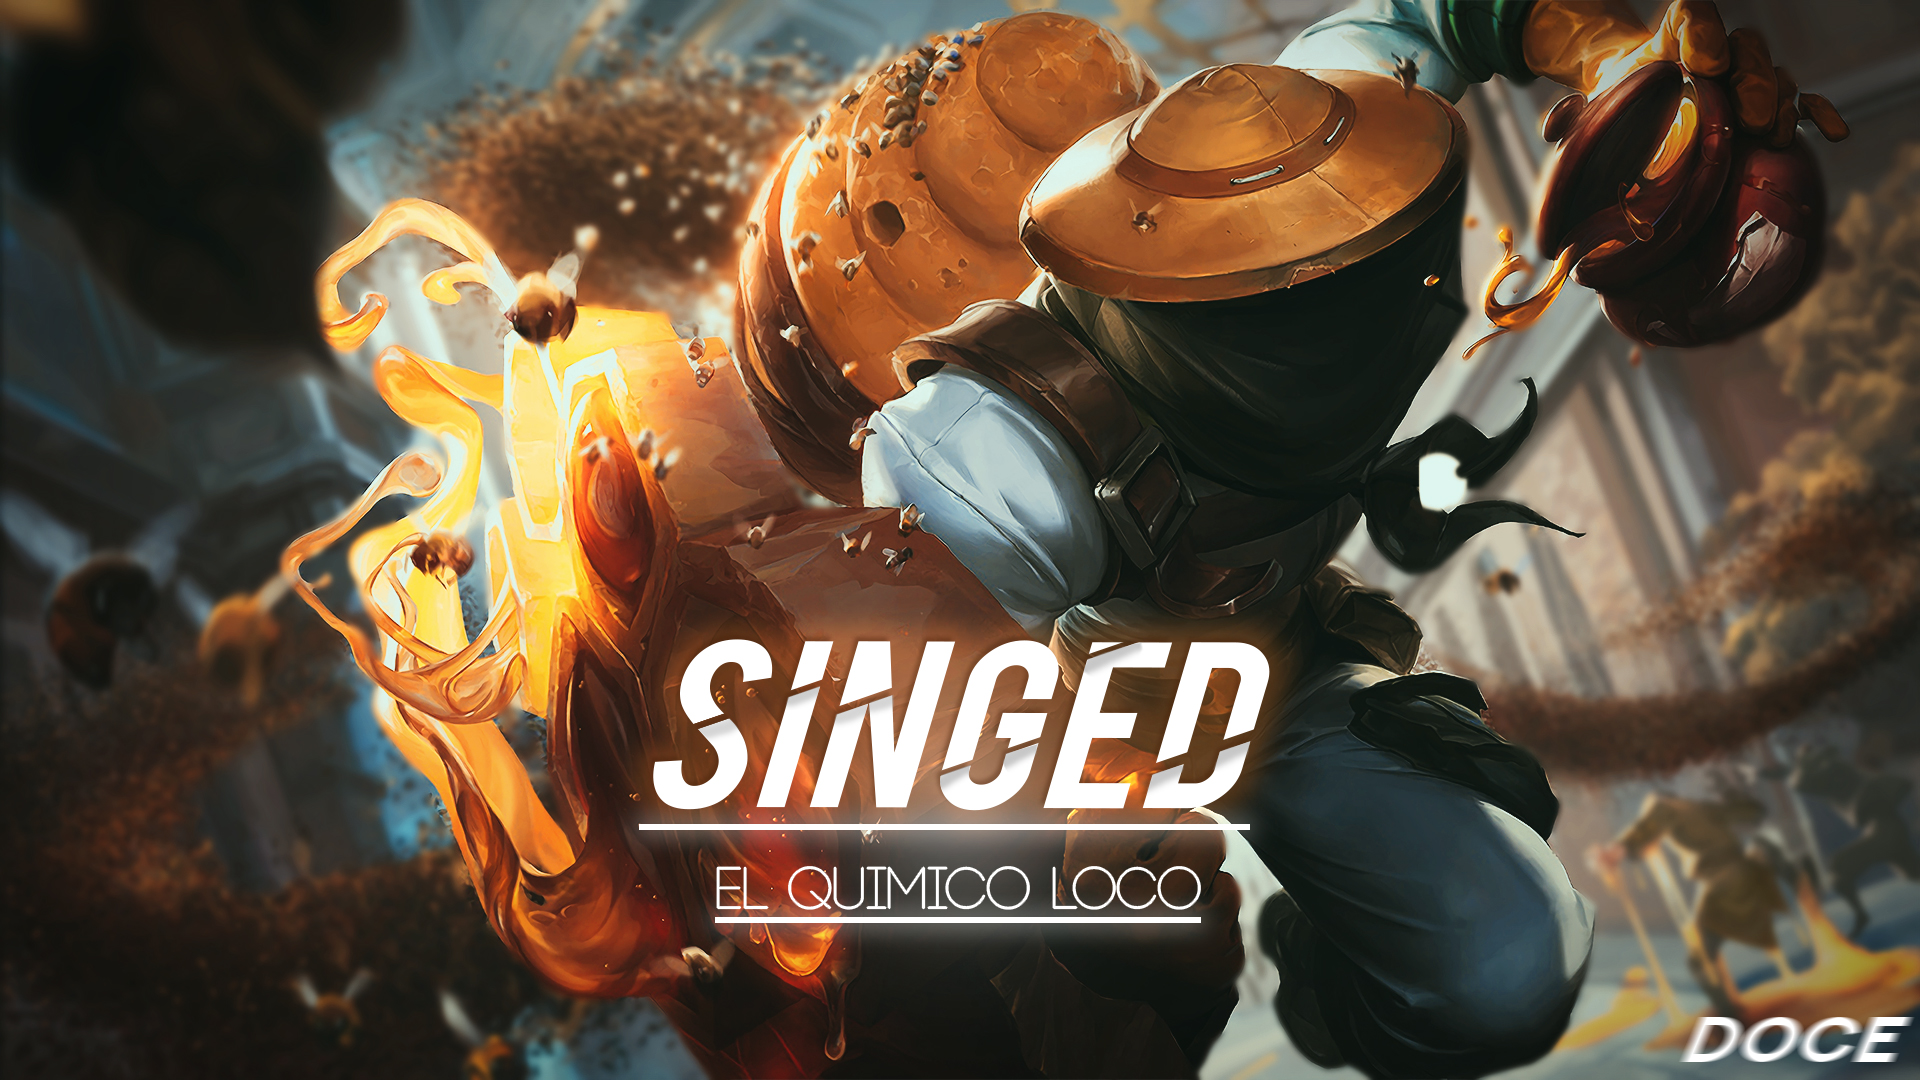 General 1920x1080 Singed League of Legends PC gaming warrior